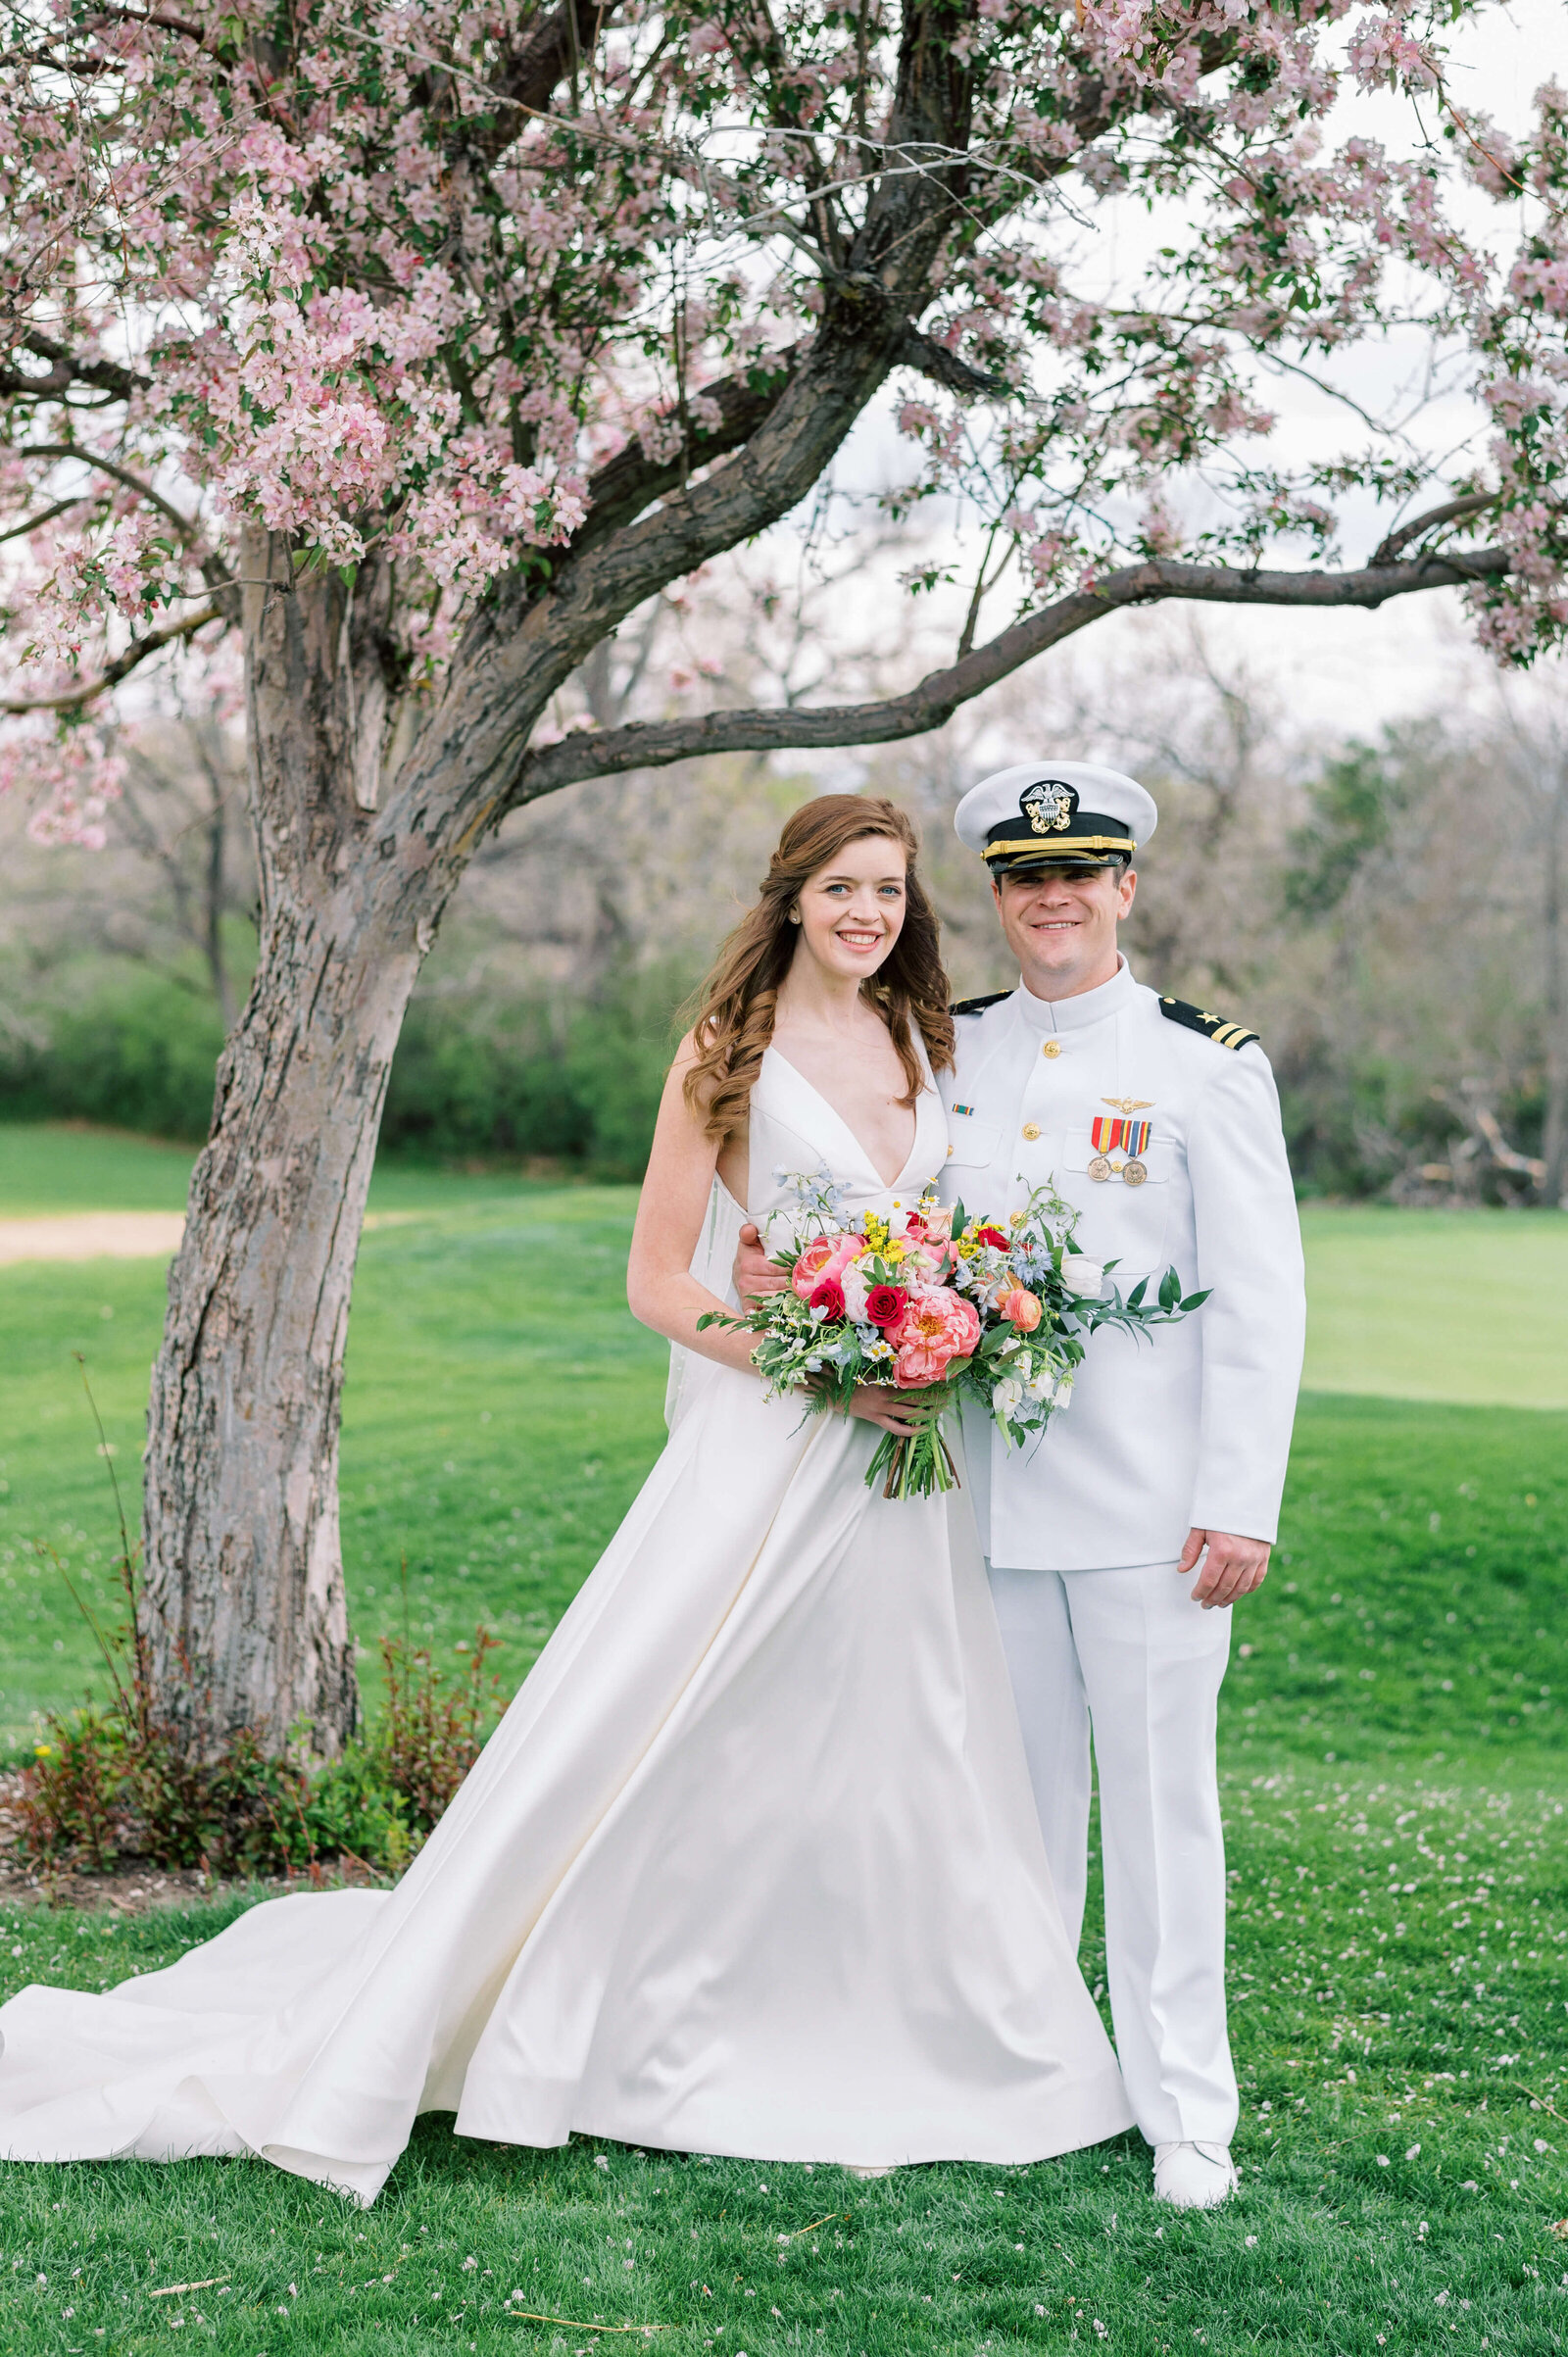 Naval officer and his bride take a picture together at their Virginia wedding